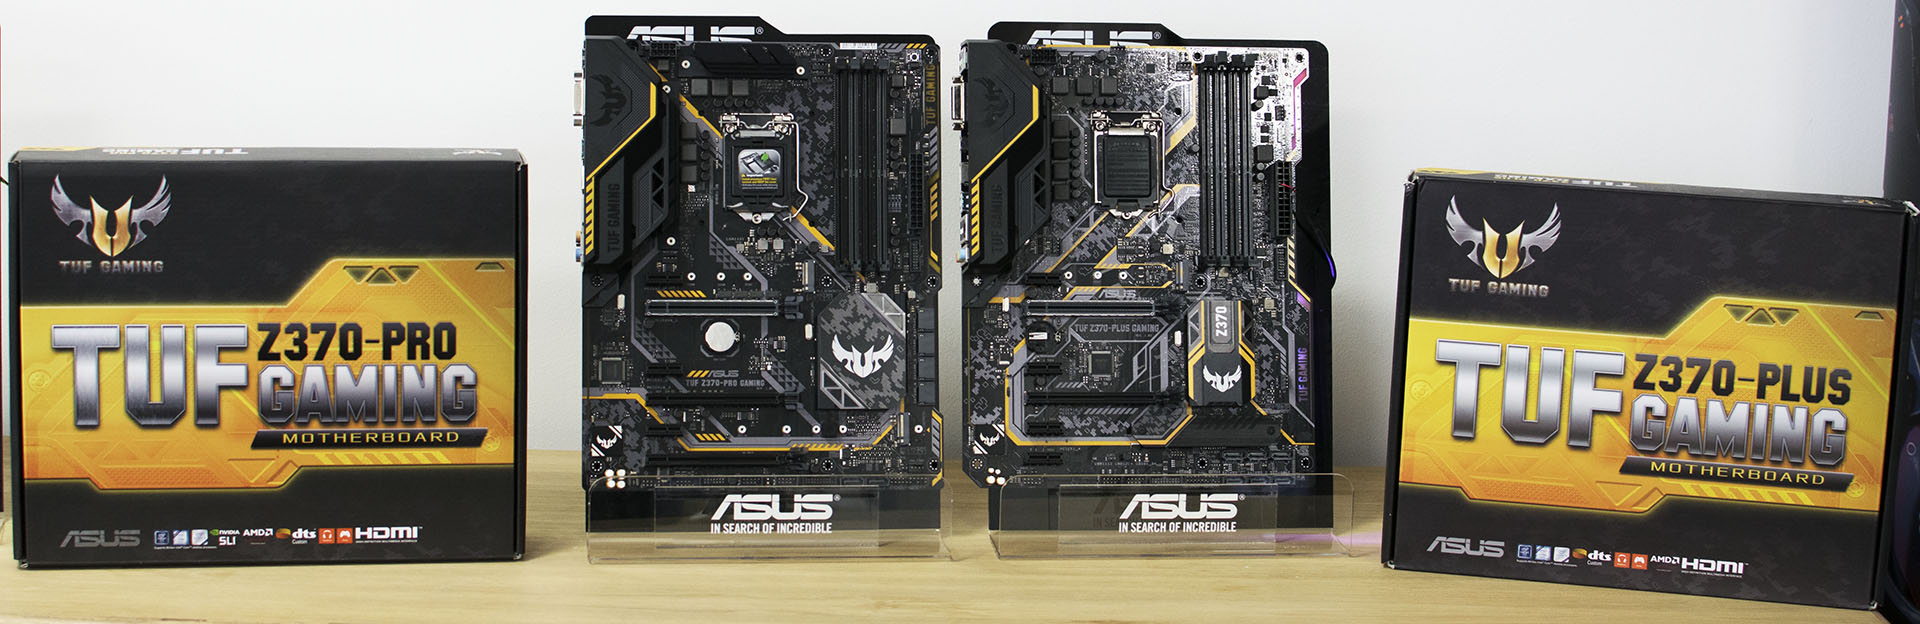 Asus Tuf Z370 Pro Gaming Z370 Plus Gaming Analyzing Z370 For Intel S 8th Generation Coffee Lake A Quick Look At 50 Motherboards